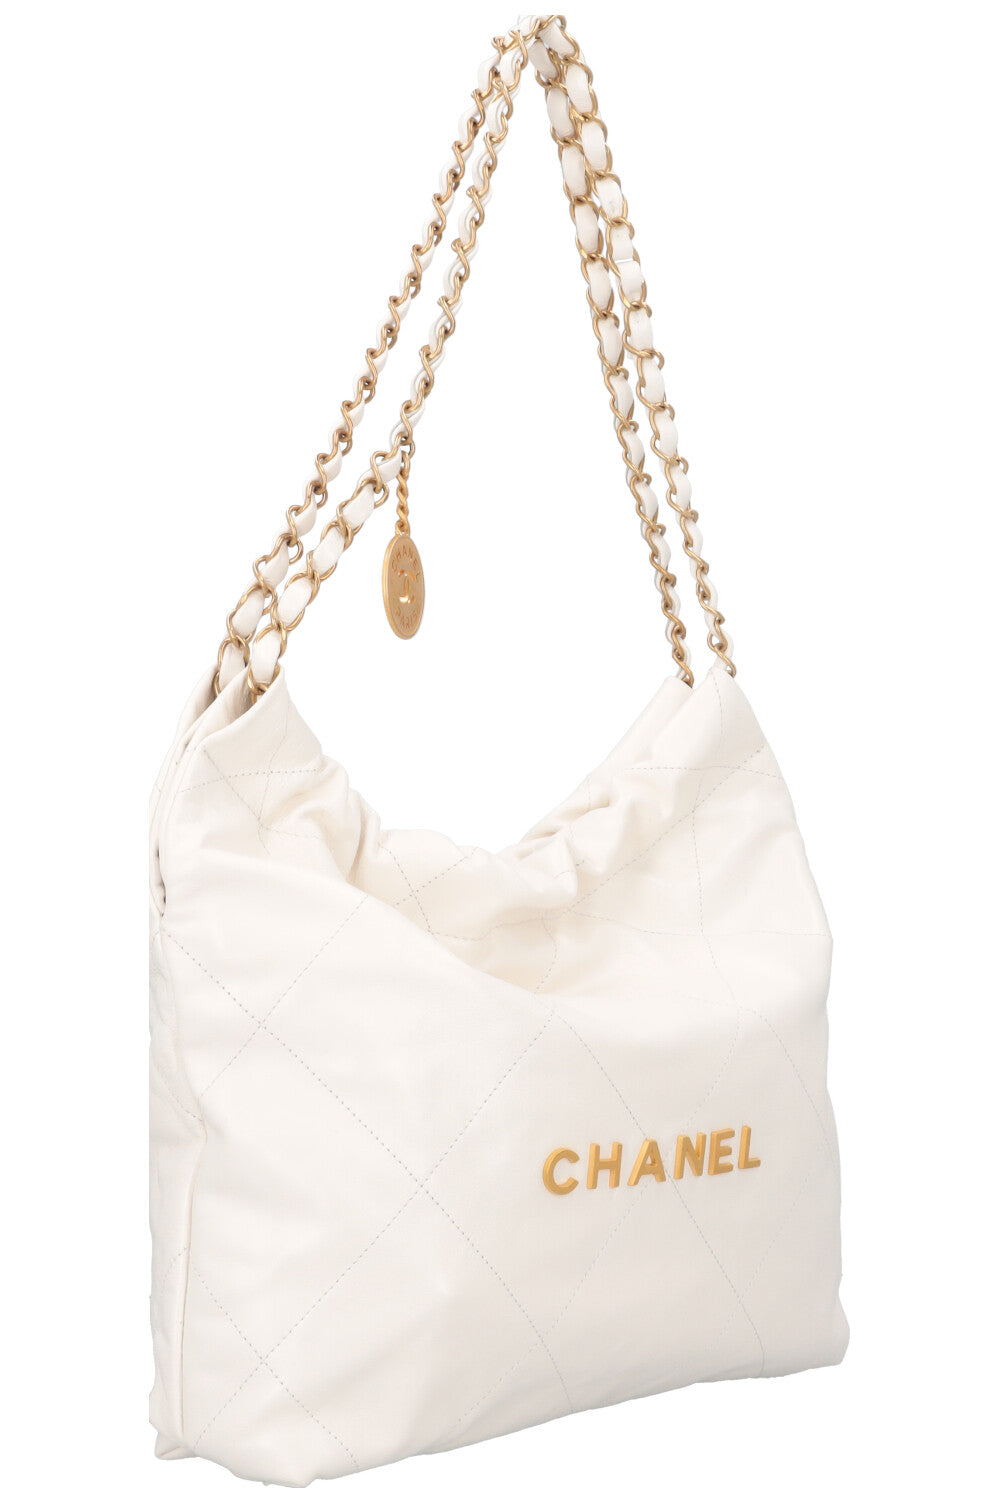 CHANEL 22 Bag Small Leather White